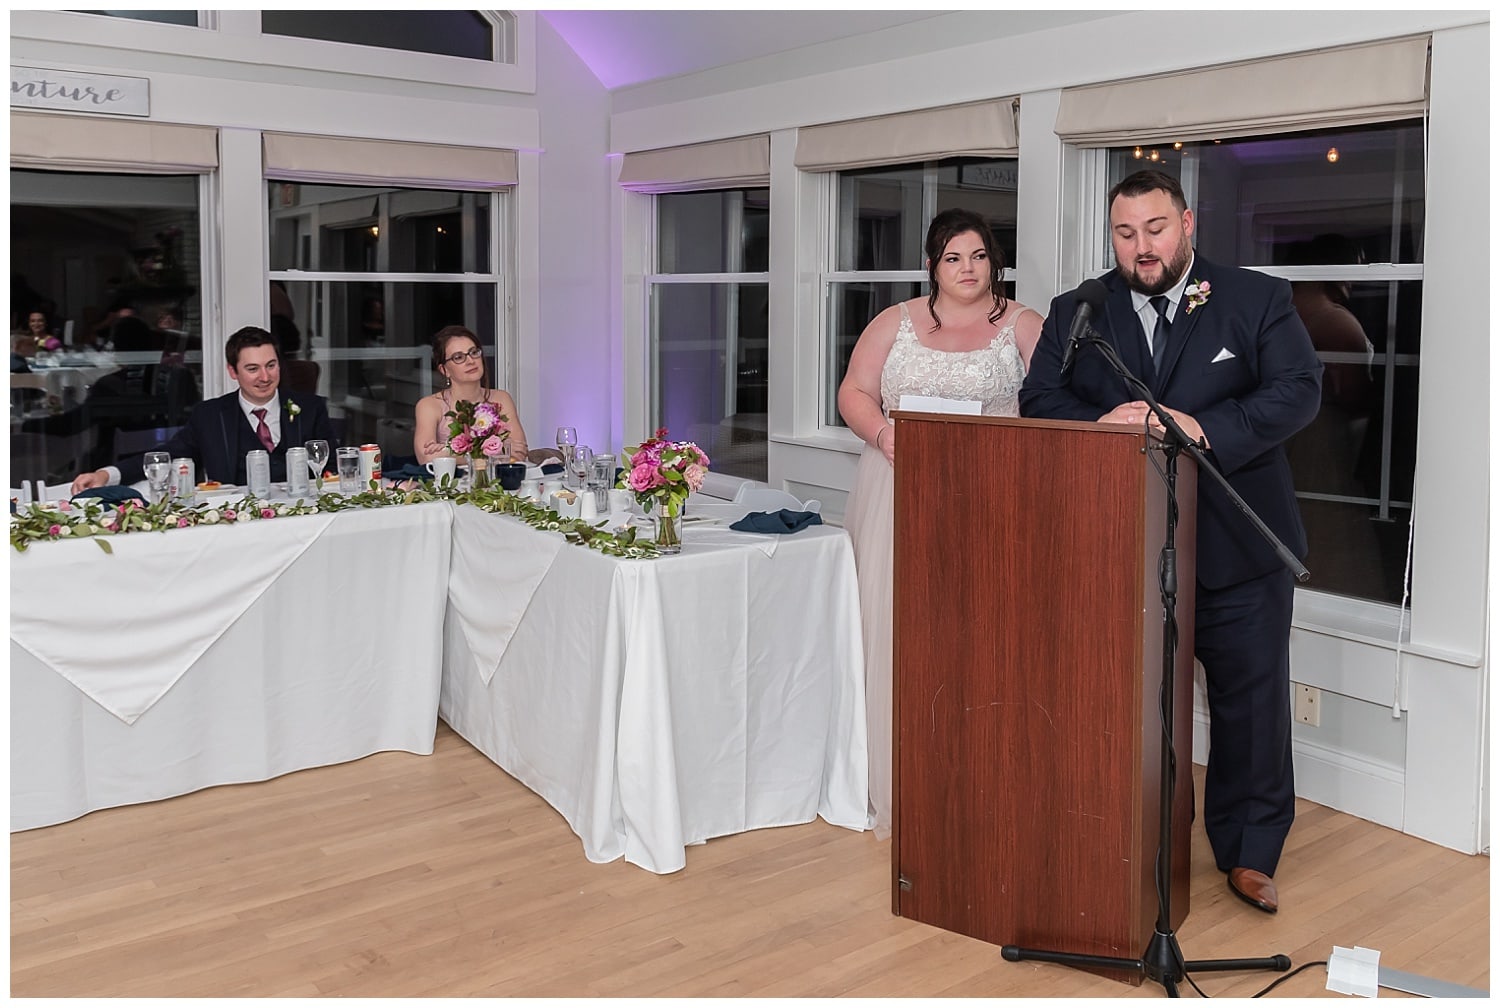 The bride and groom give their thank you speech during their wedding reception at the Oceanstone Resort in Nova Scotia.